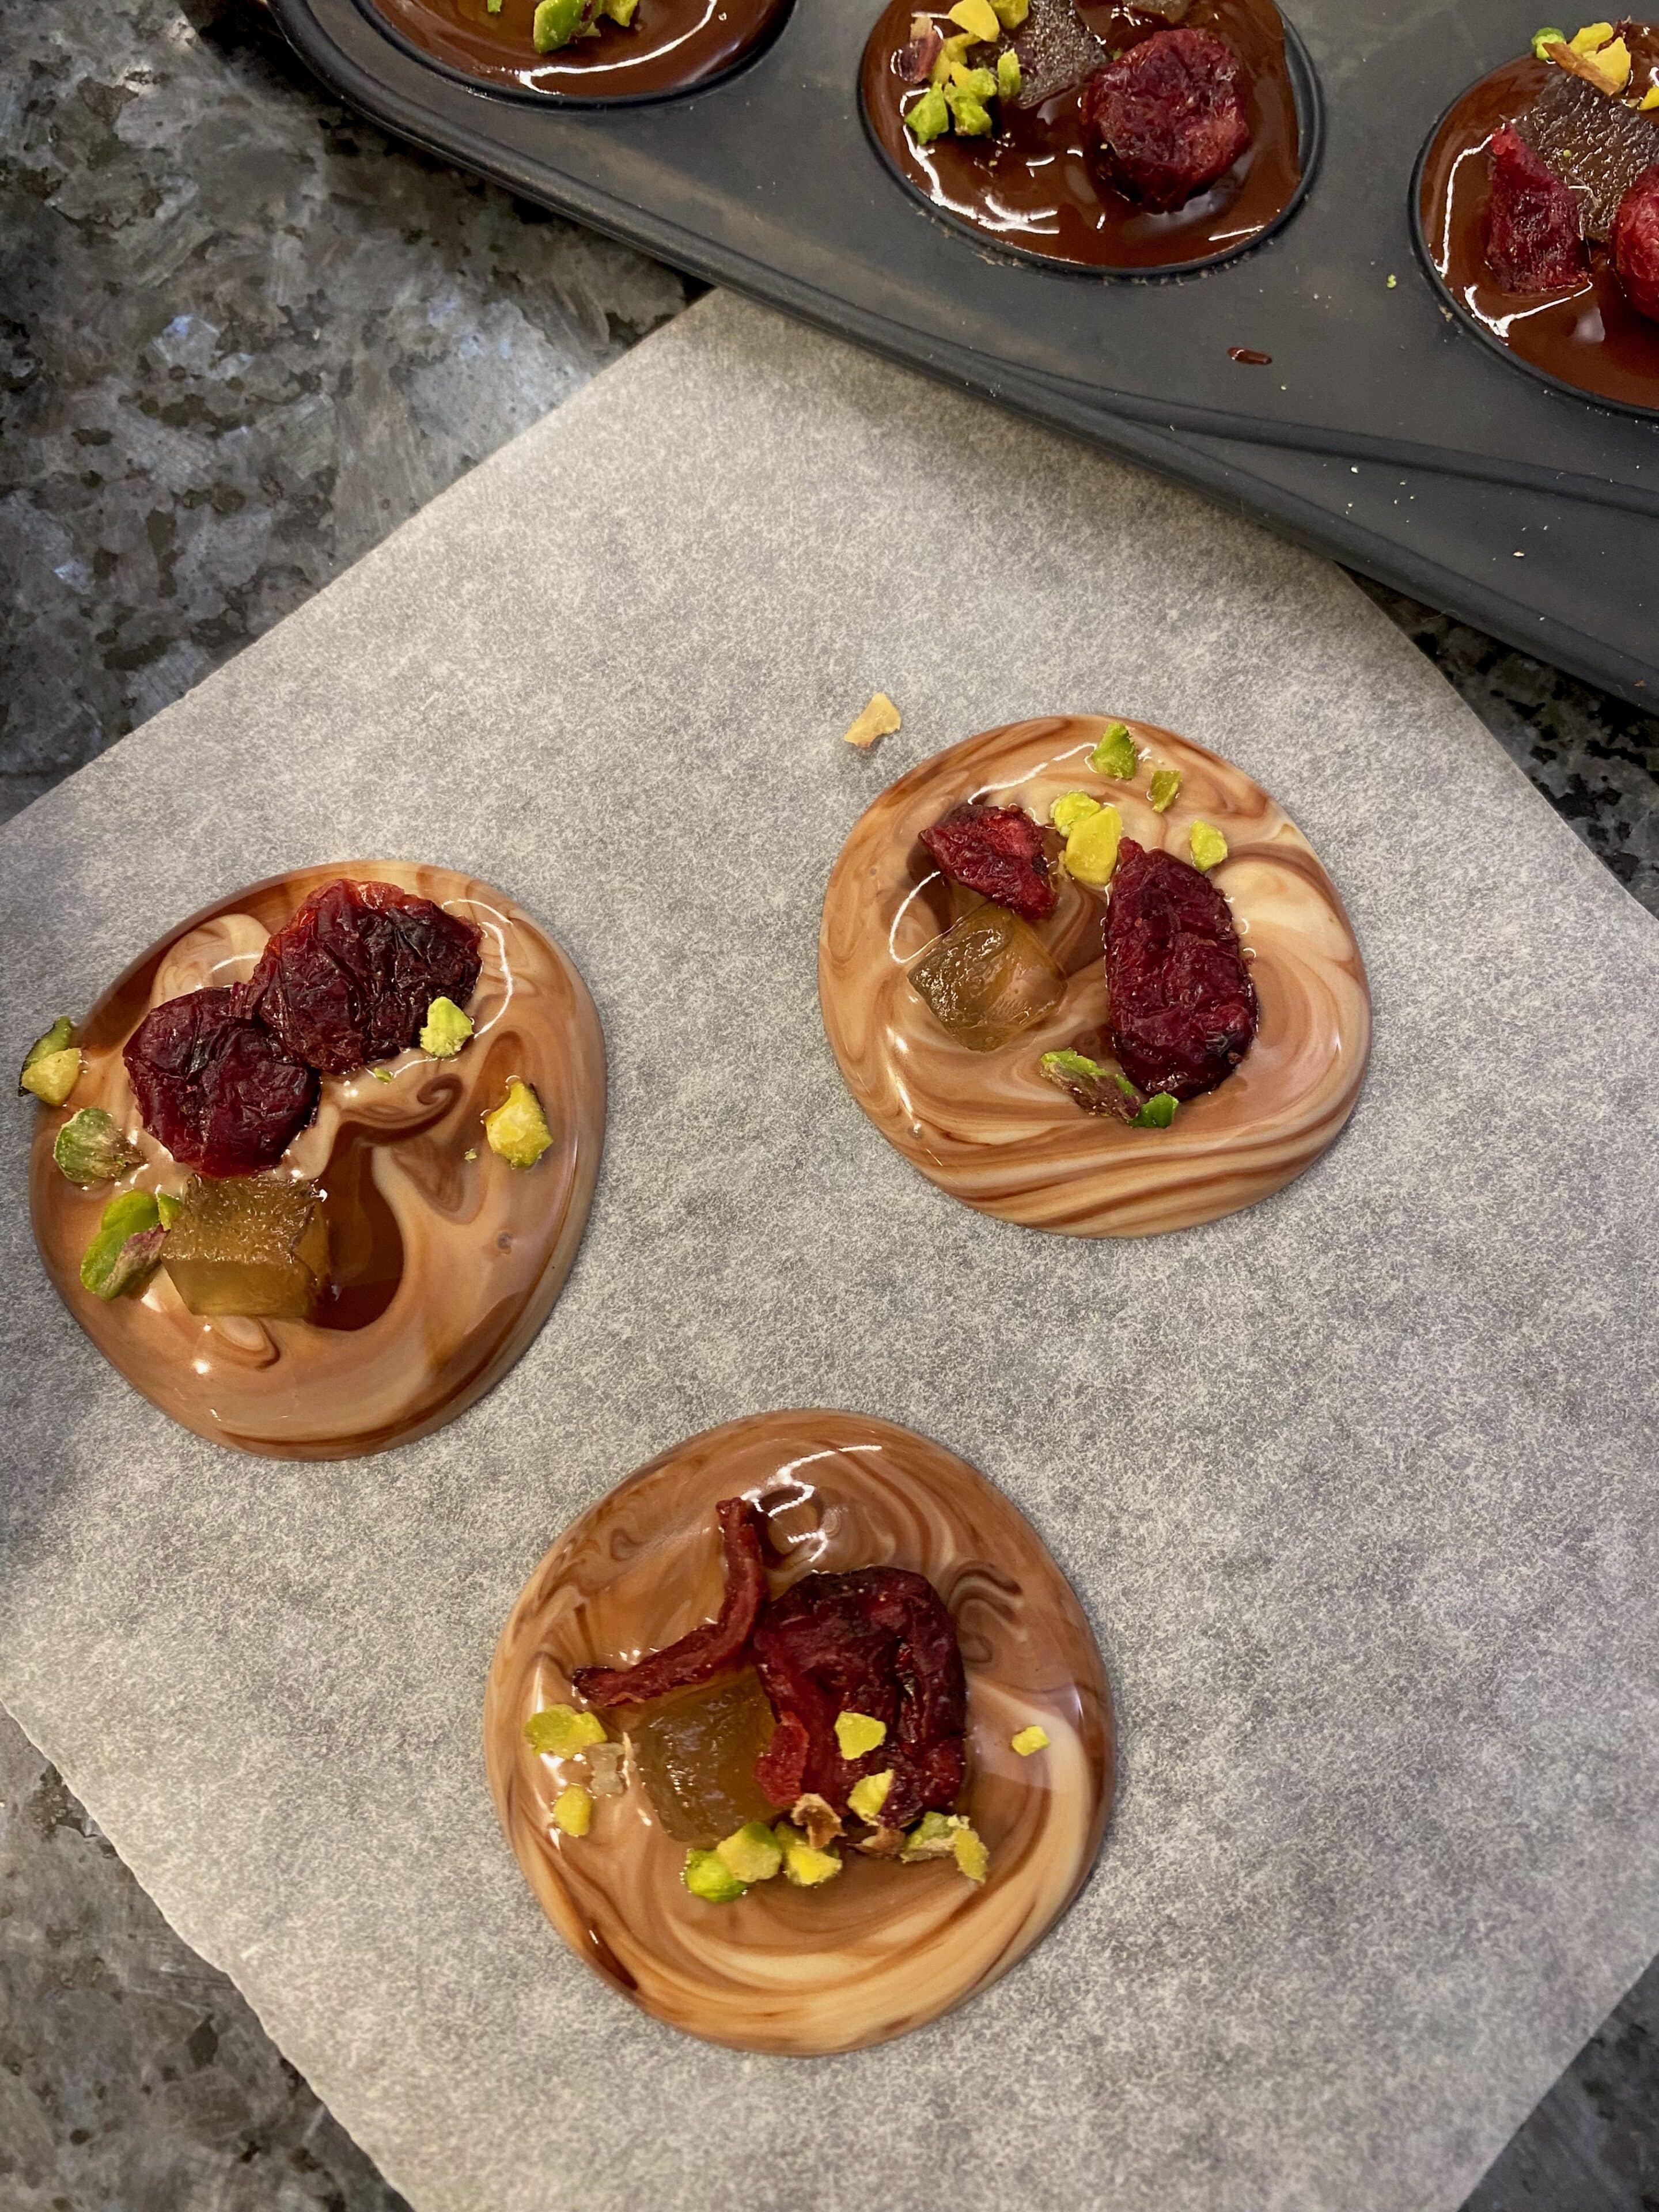 mendiants or chocolate disks with both dark and white chocolate topped with dried fruits and nuts